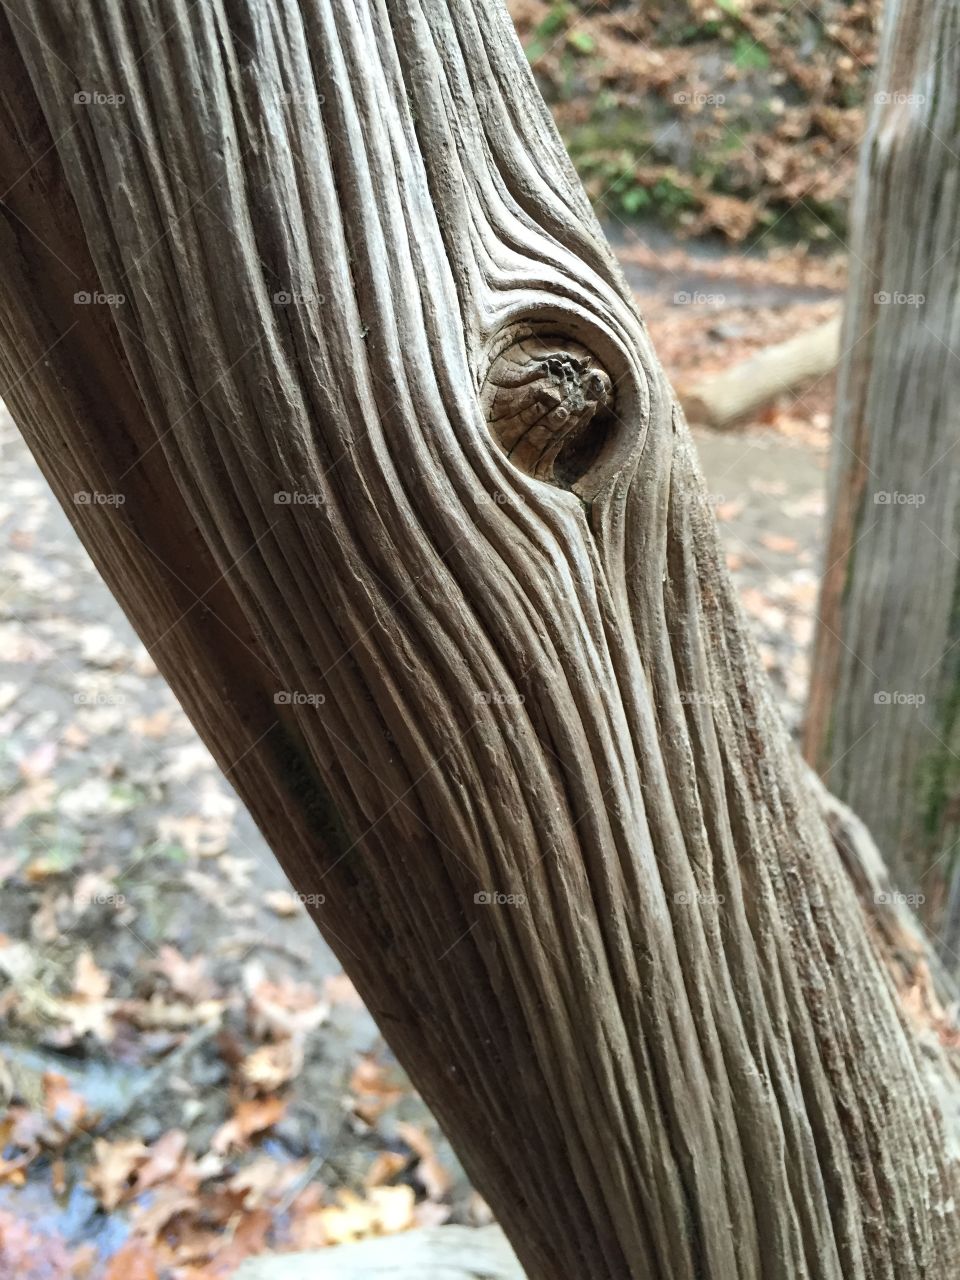 Closeup of deeply grooved surface of old weathered tree trunk